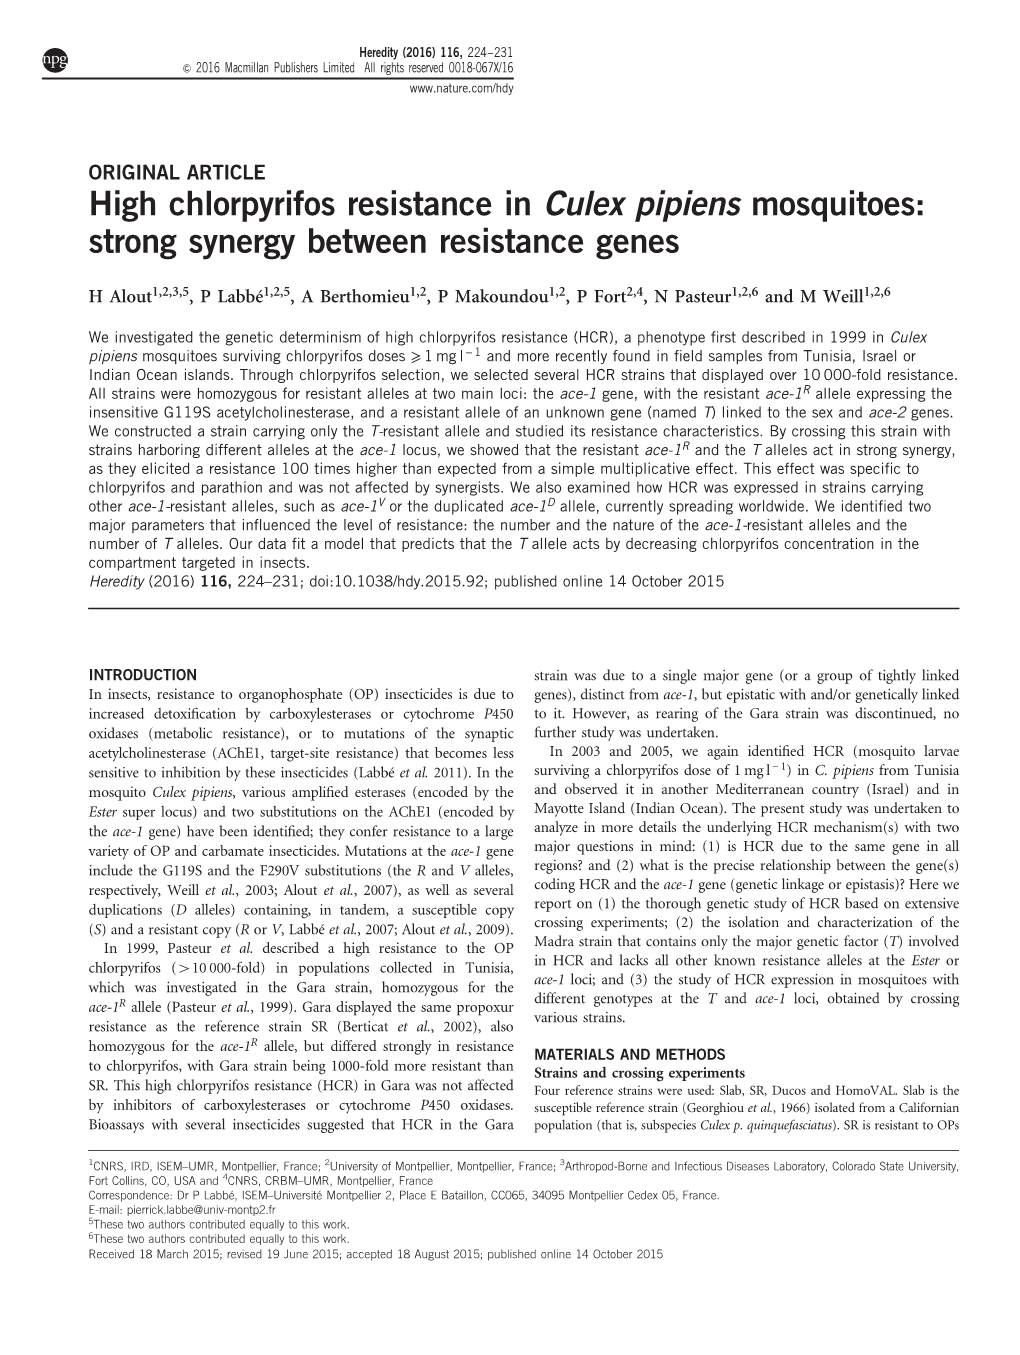 High Chlorpyrifos Resistance in Culex Pipiens Mosquitoes: Strong Synergy Between Resistance Genes